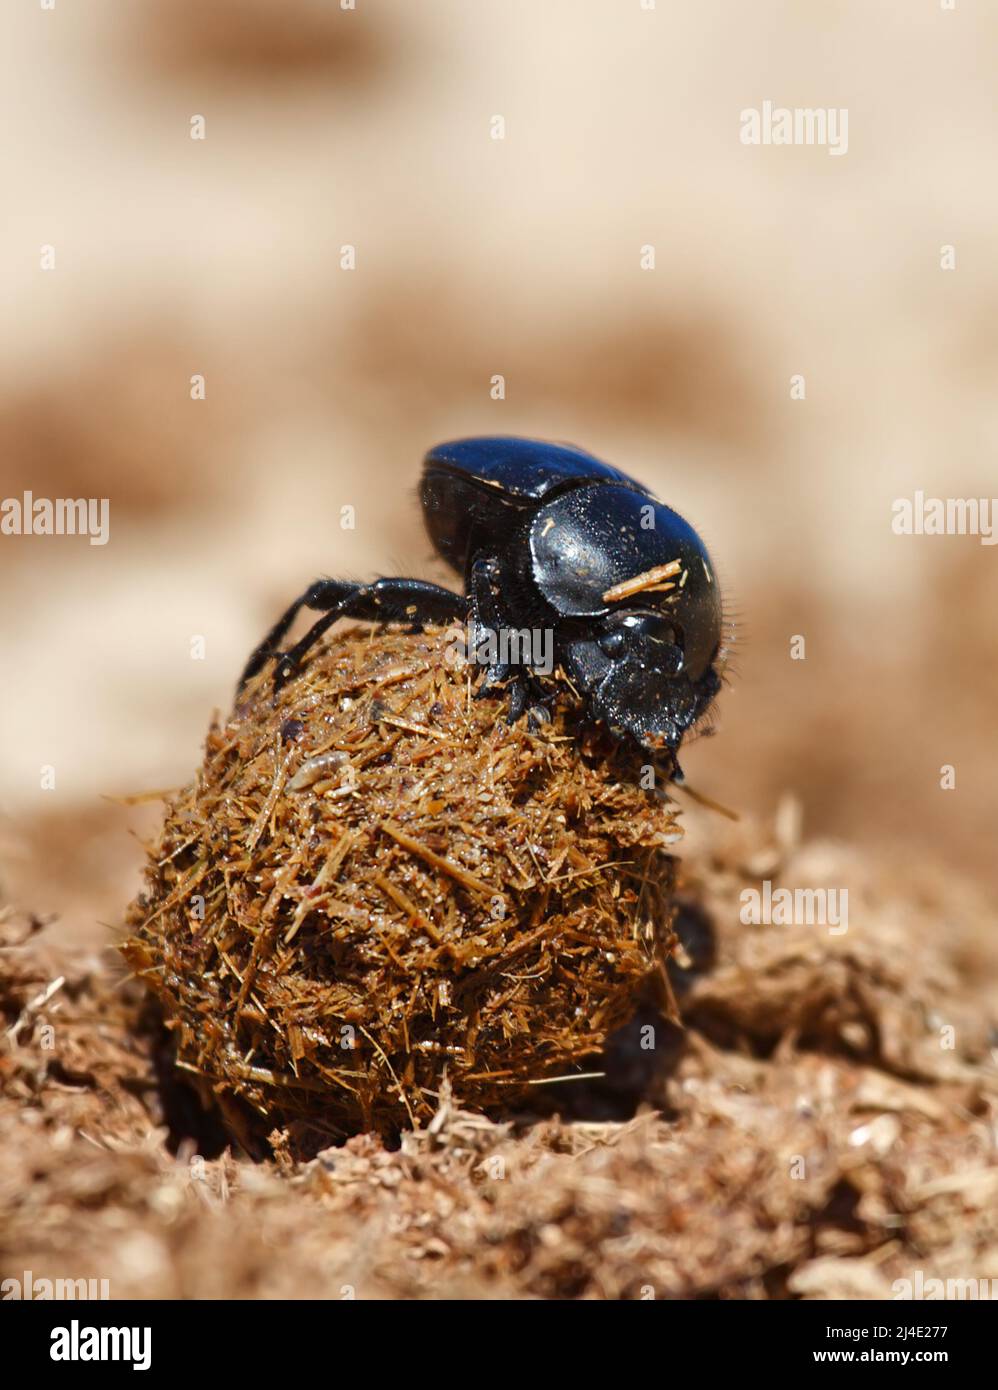 sacred scarab at work rolling a dung ball Stock Photo